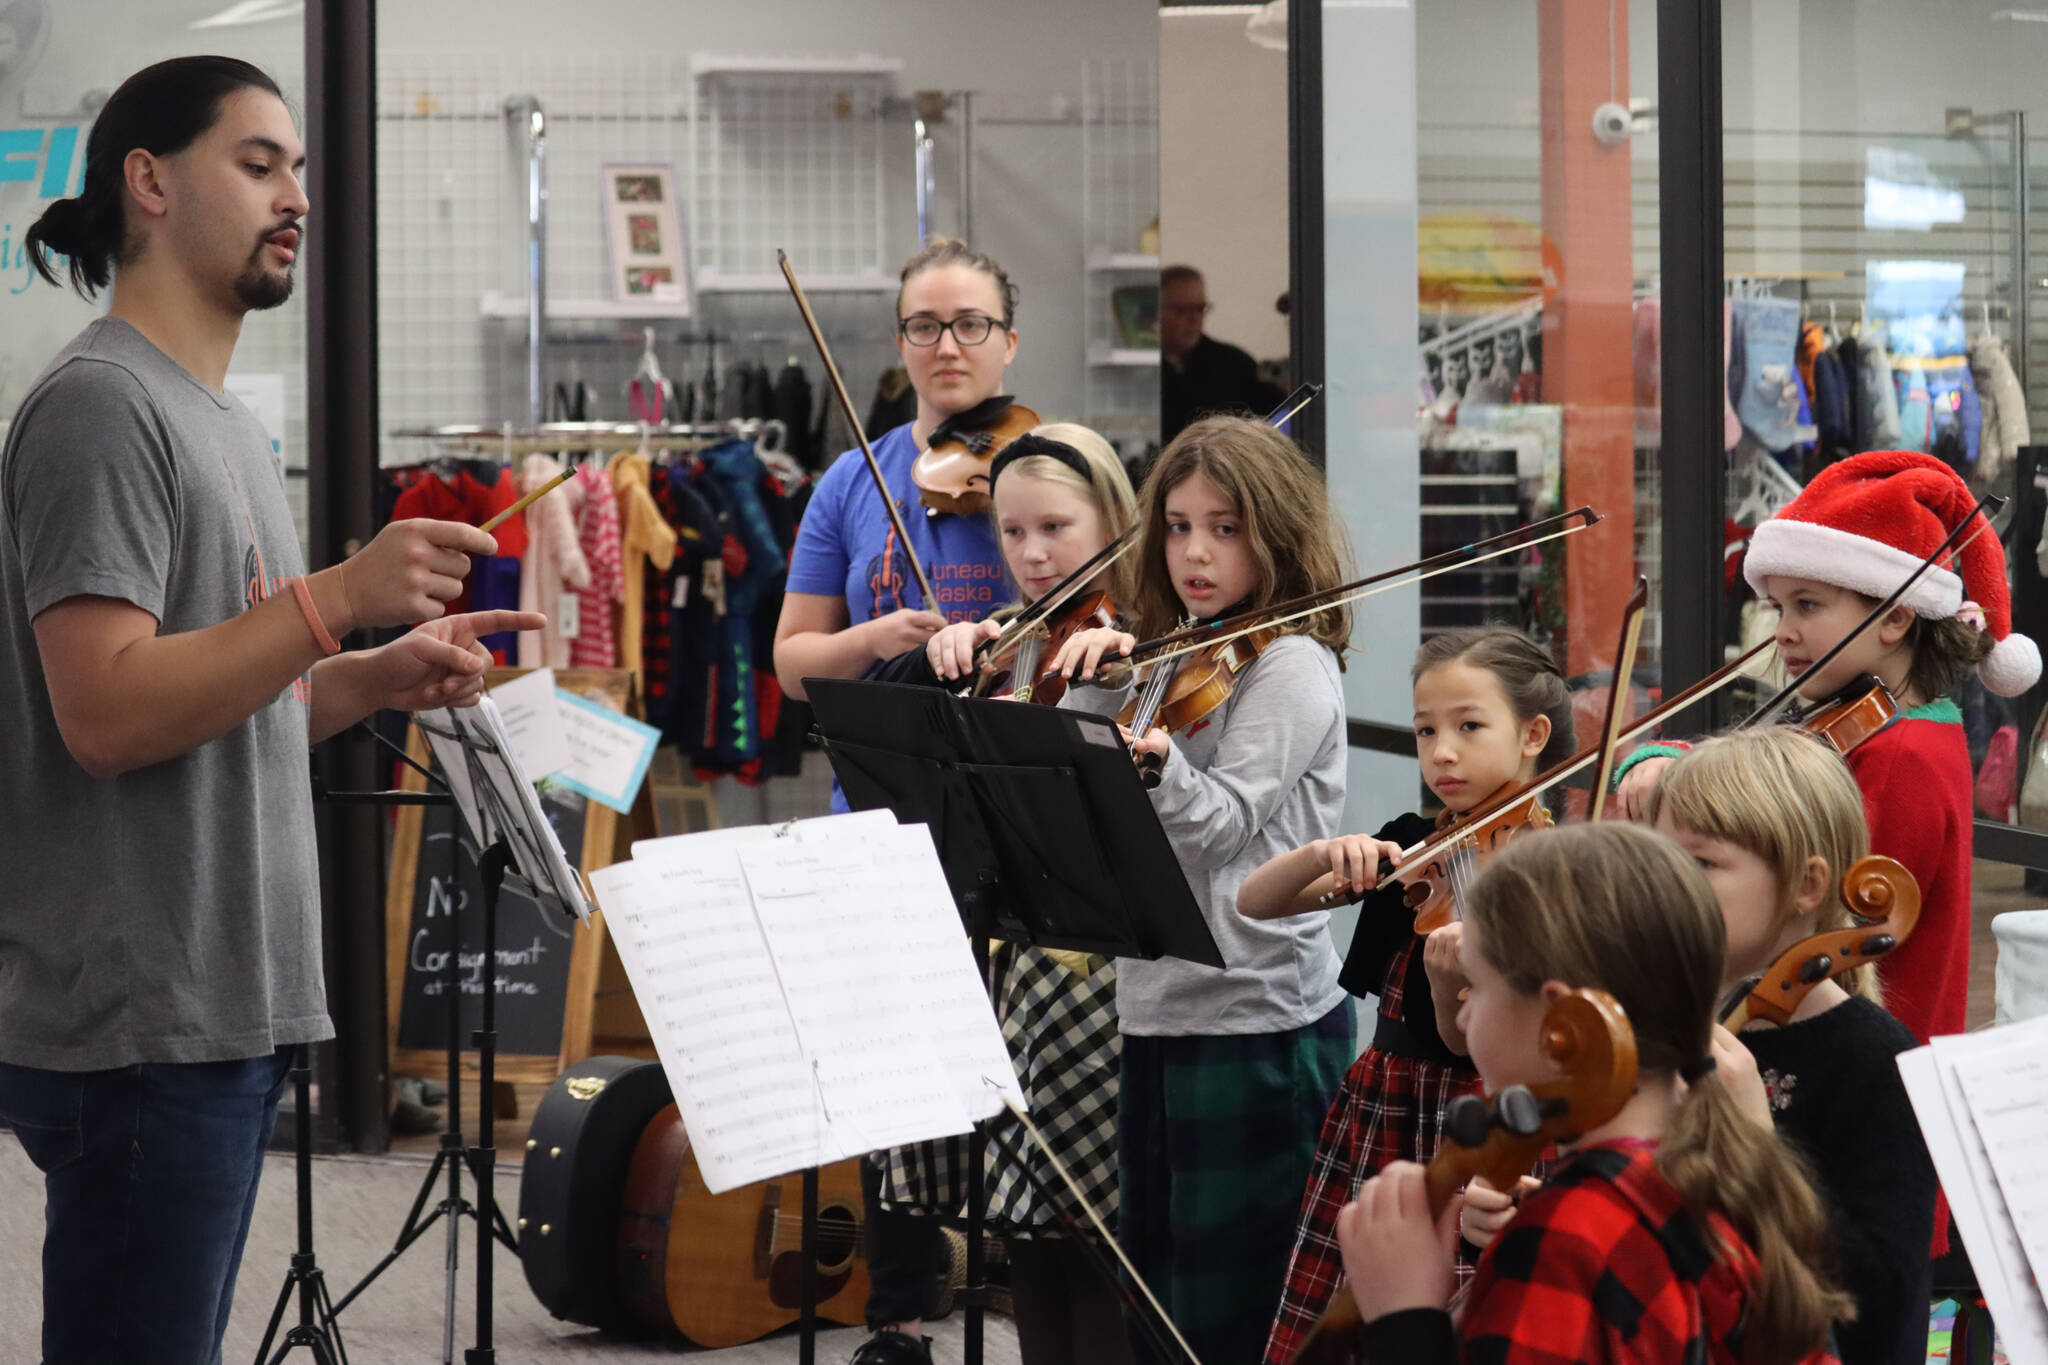 Instructor James Cheng with Juneau Alaska Music Matters conducts students from the intermediate program on Saturday during the annual Holiday Village event at the Mendenhall Mall. (Jonson Kuhn / Juneau Empire)